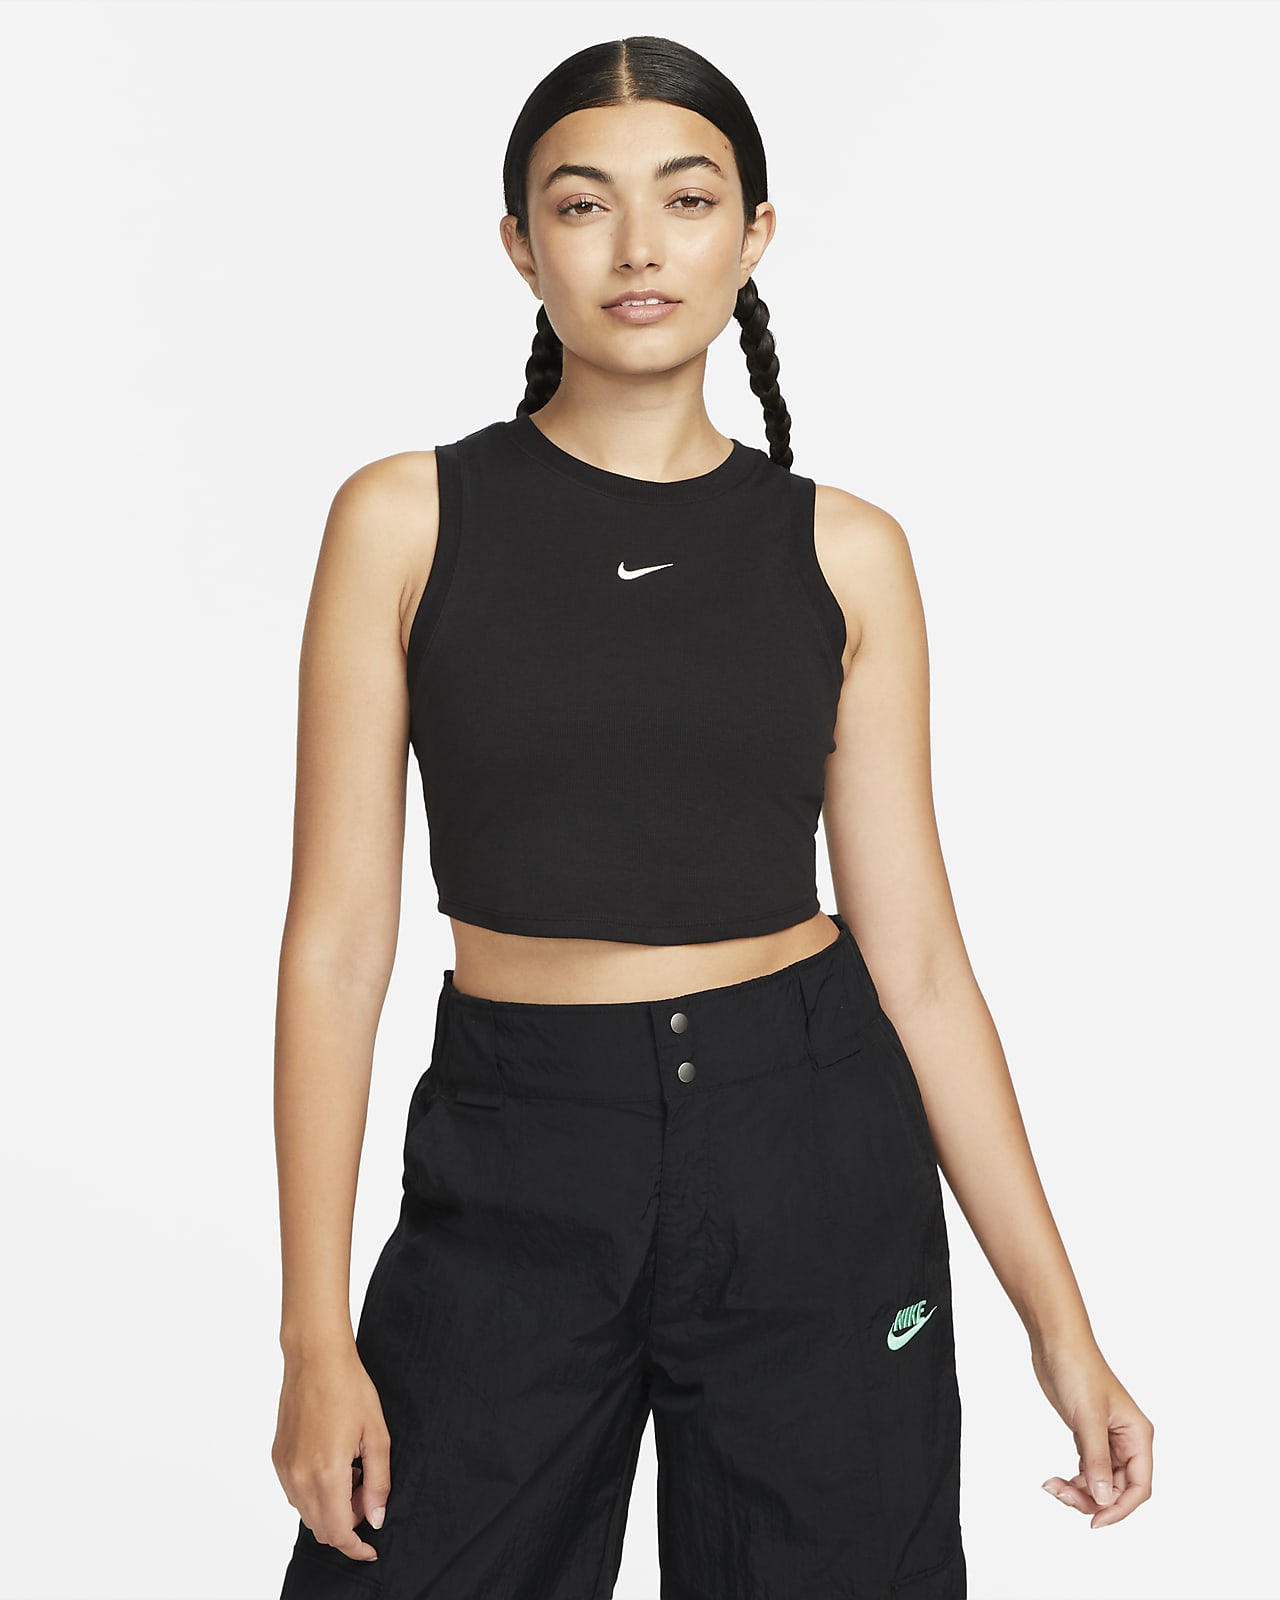 61 Nike women outfits ideas  workout clothes, nike women, fitness